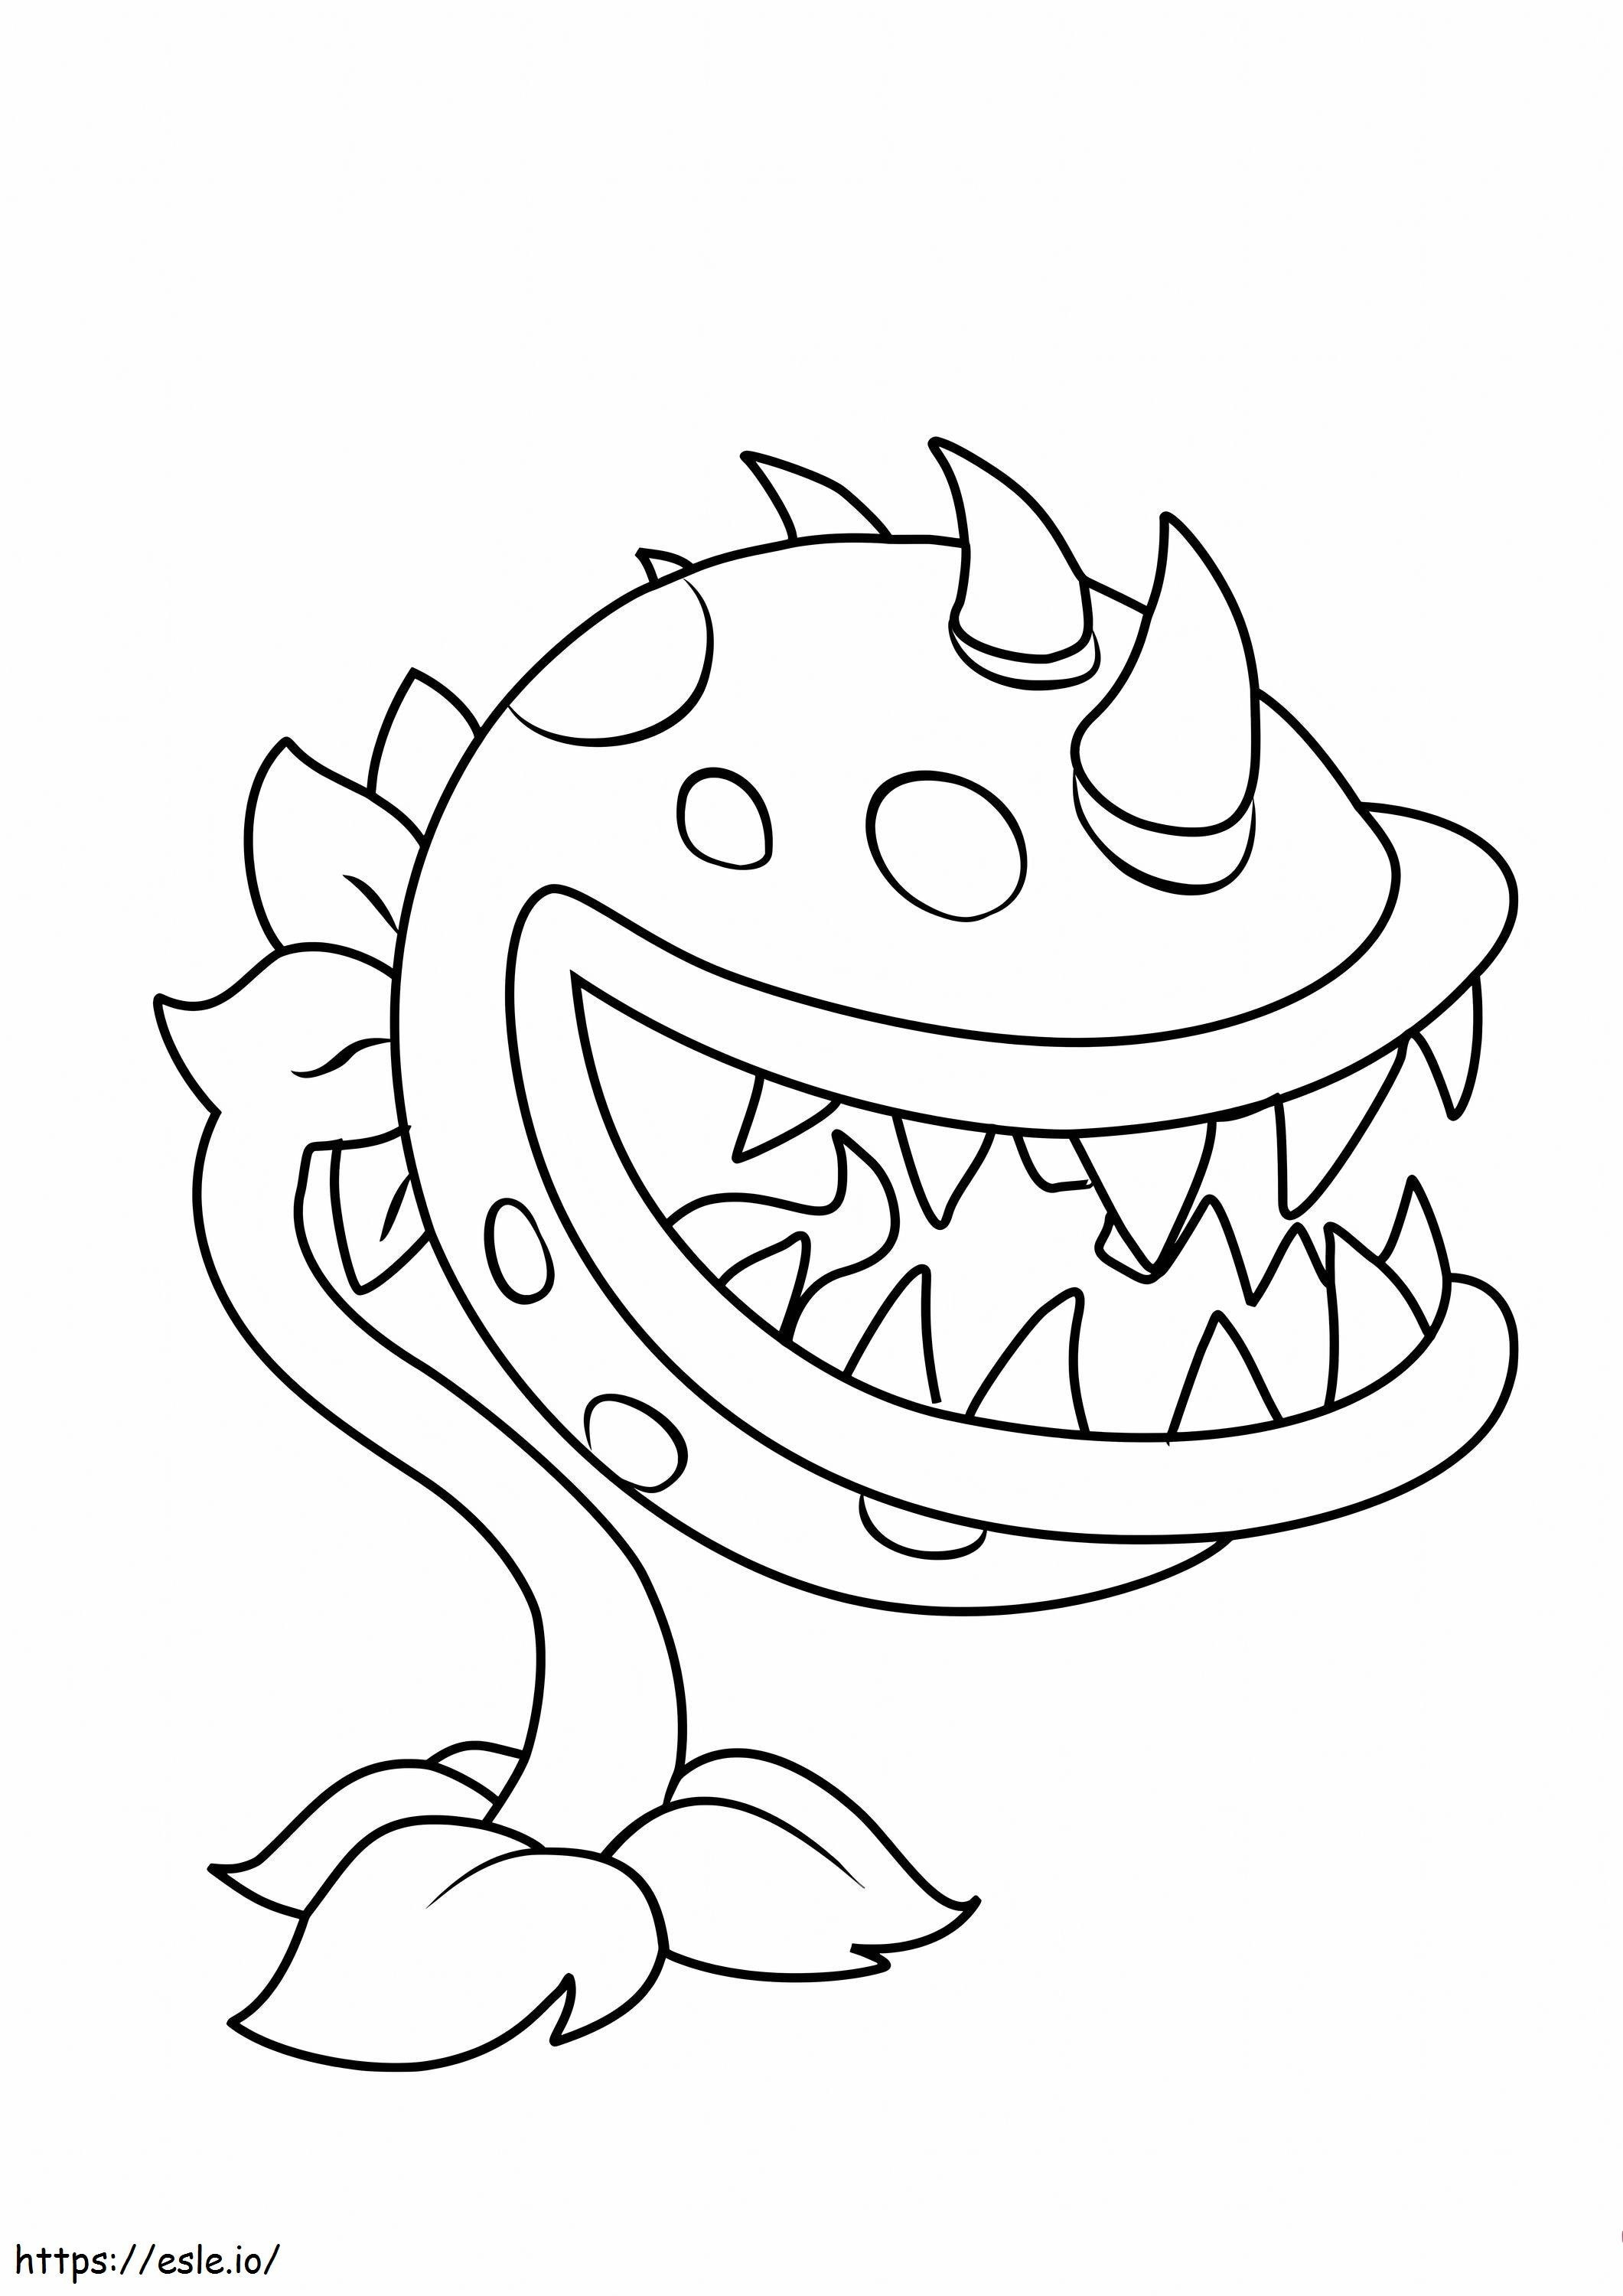 Chomper In Plants Vs Zombies coloring page